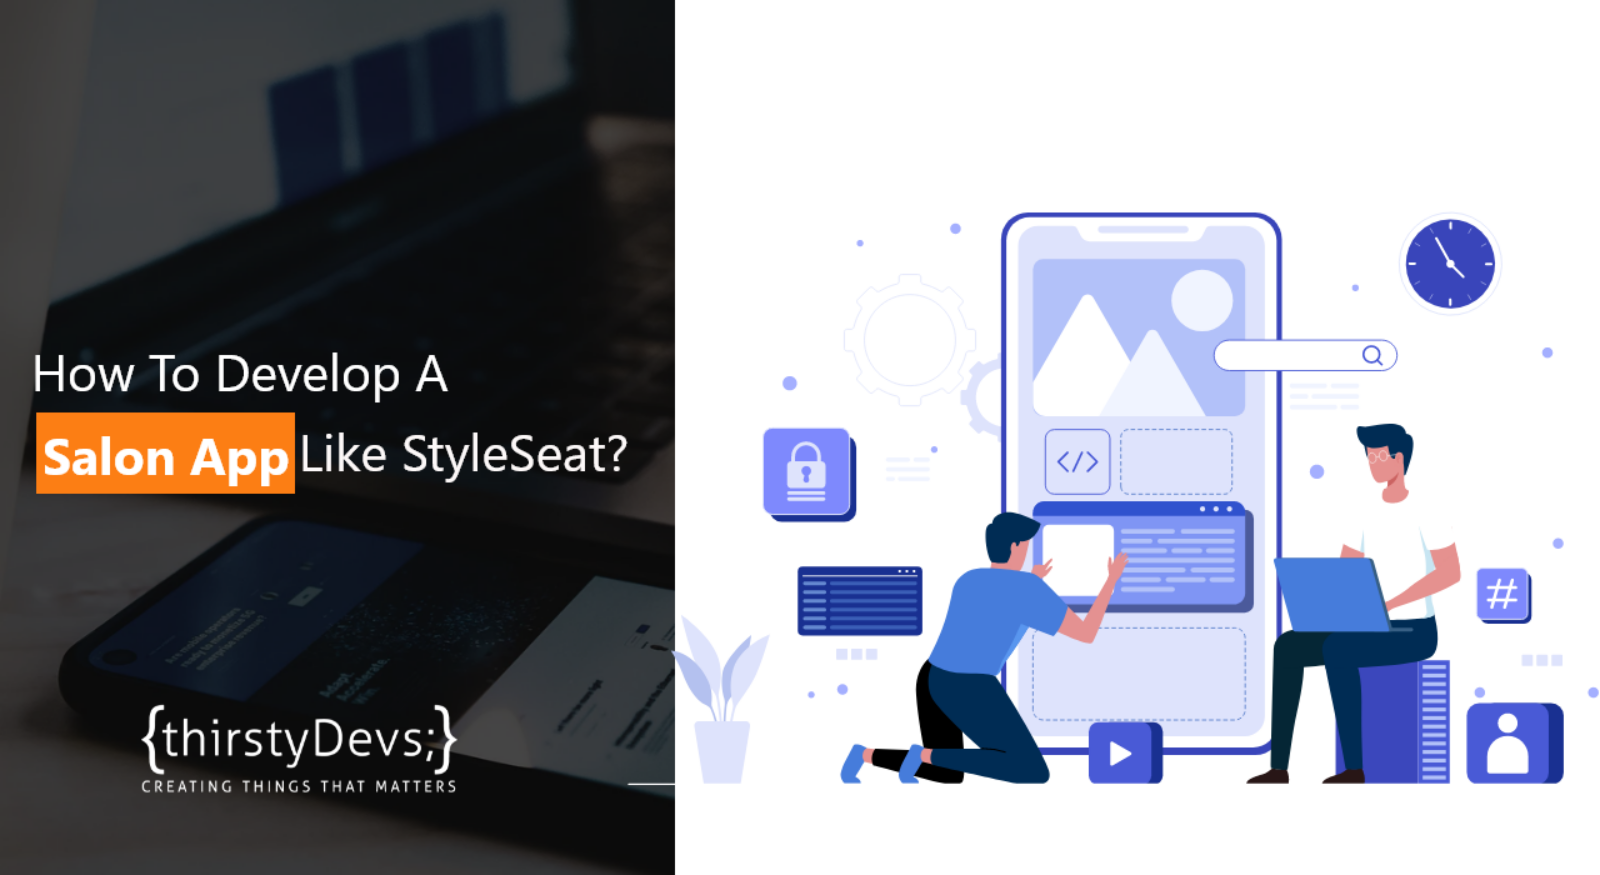 How to Develop a Salon App like StyleSeat